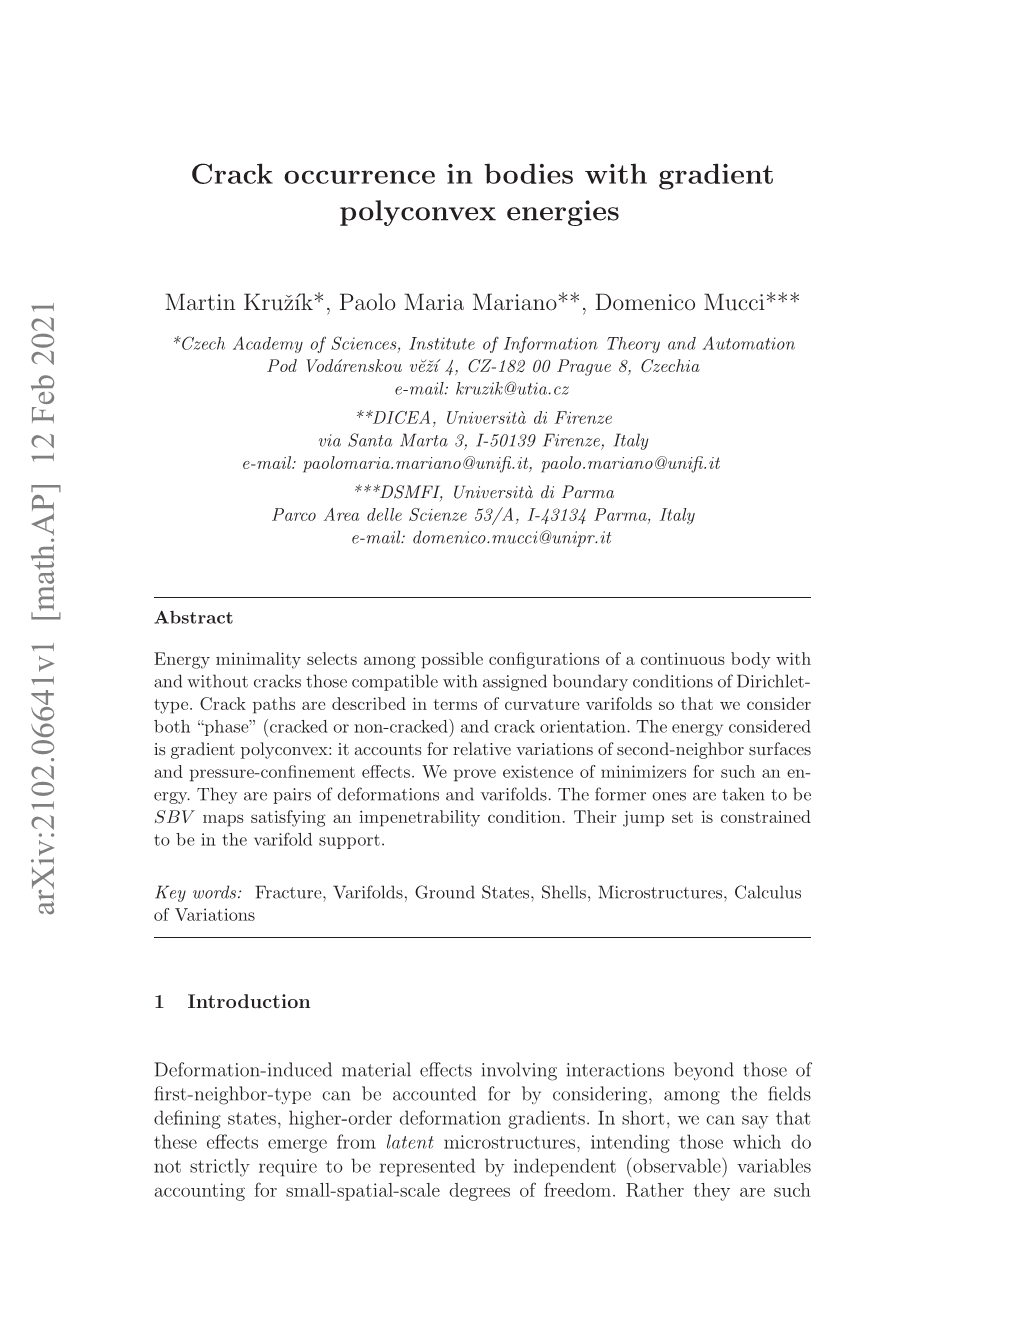 Crack Occurrence in Bodies with Gradient Polyconvex Energies